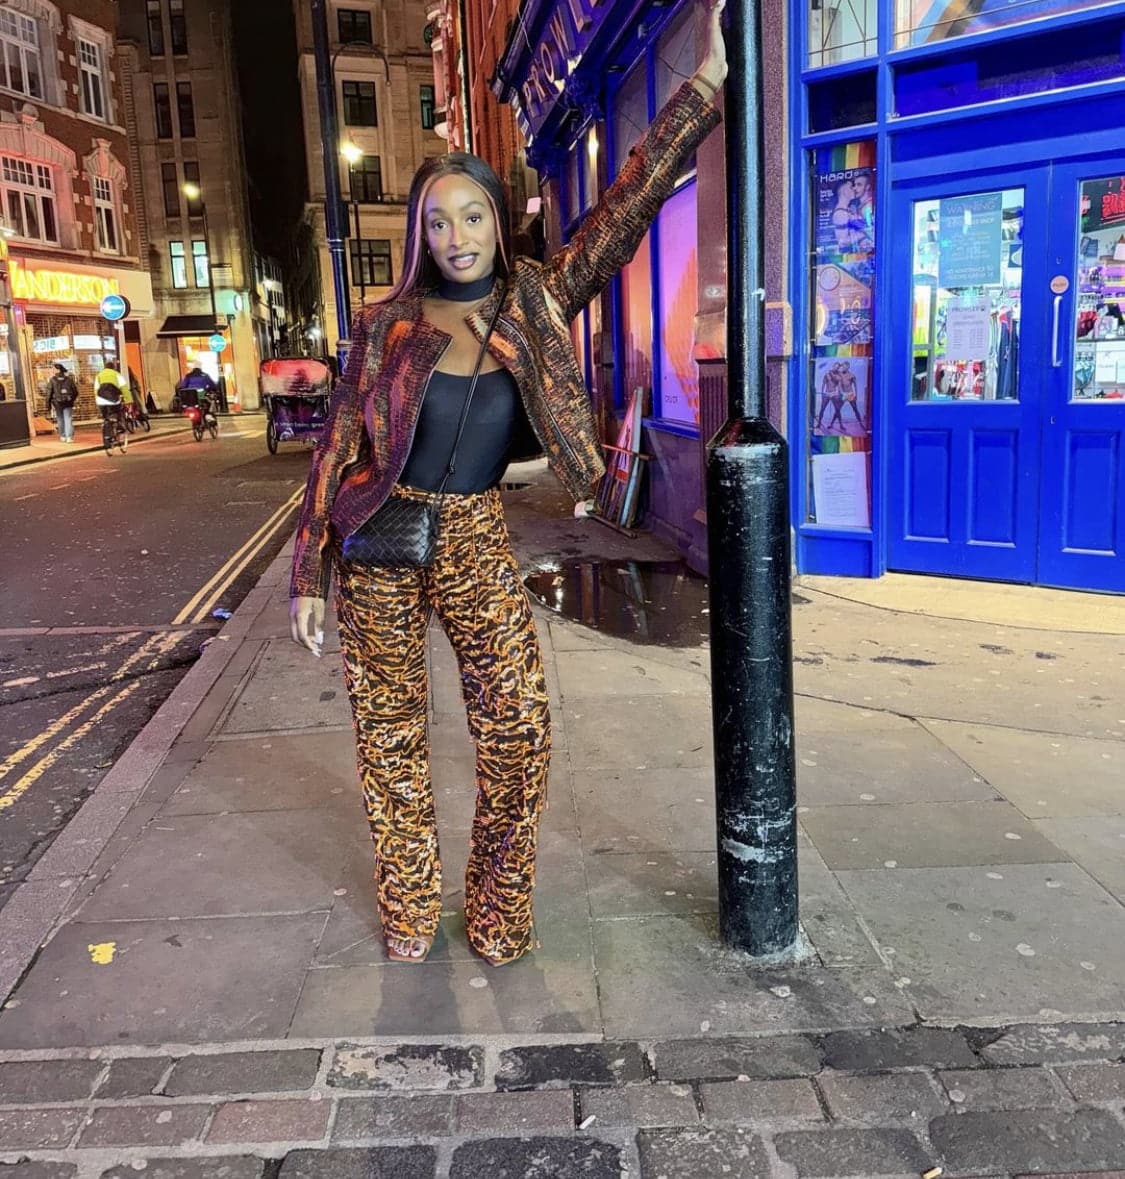 Dj Cuppy in an animal print leather jacket, paired with a black top, and striped leather pants.